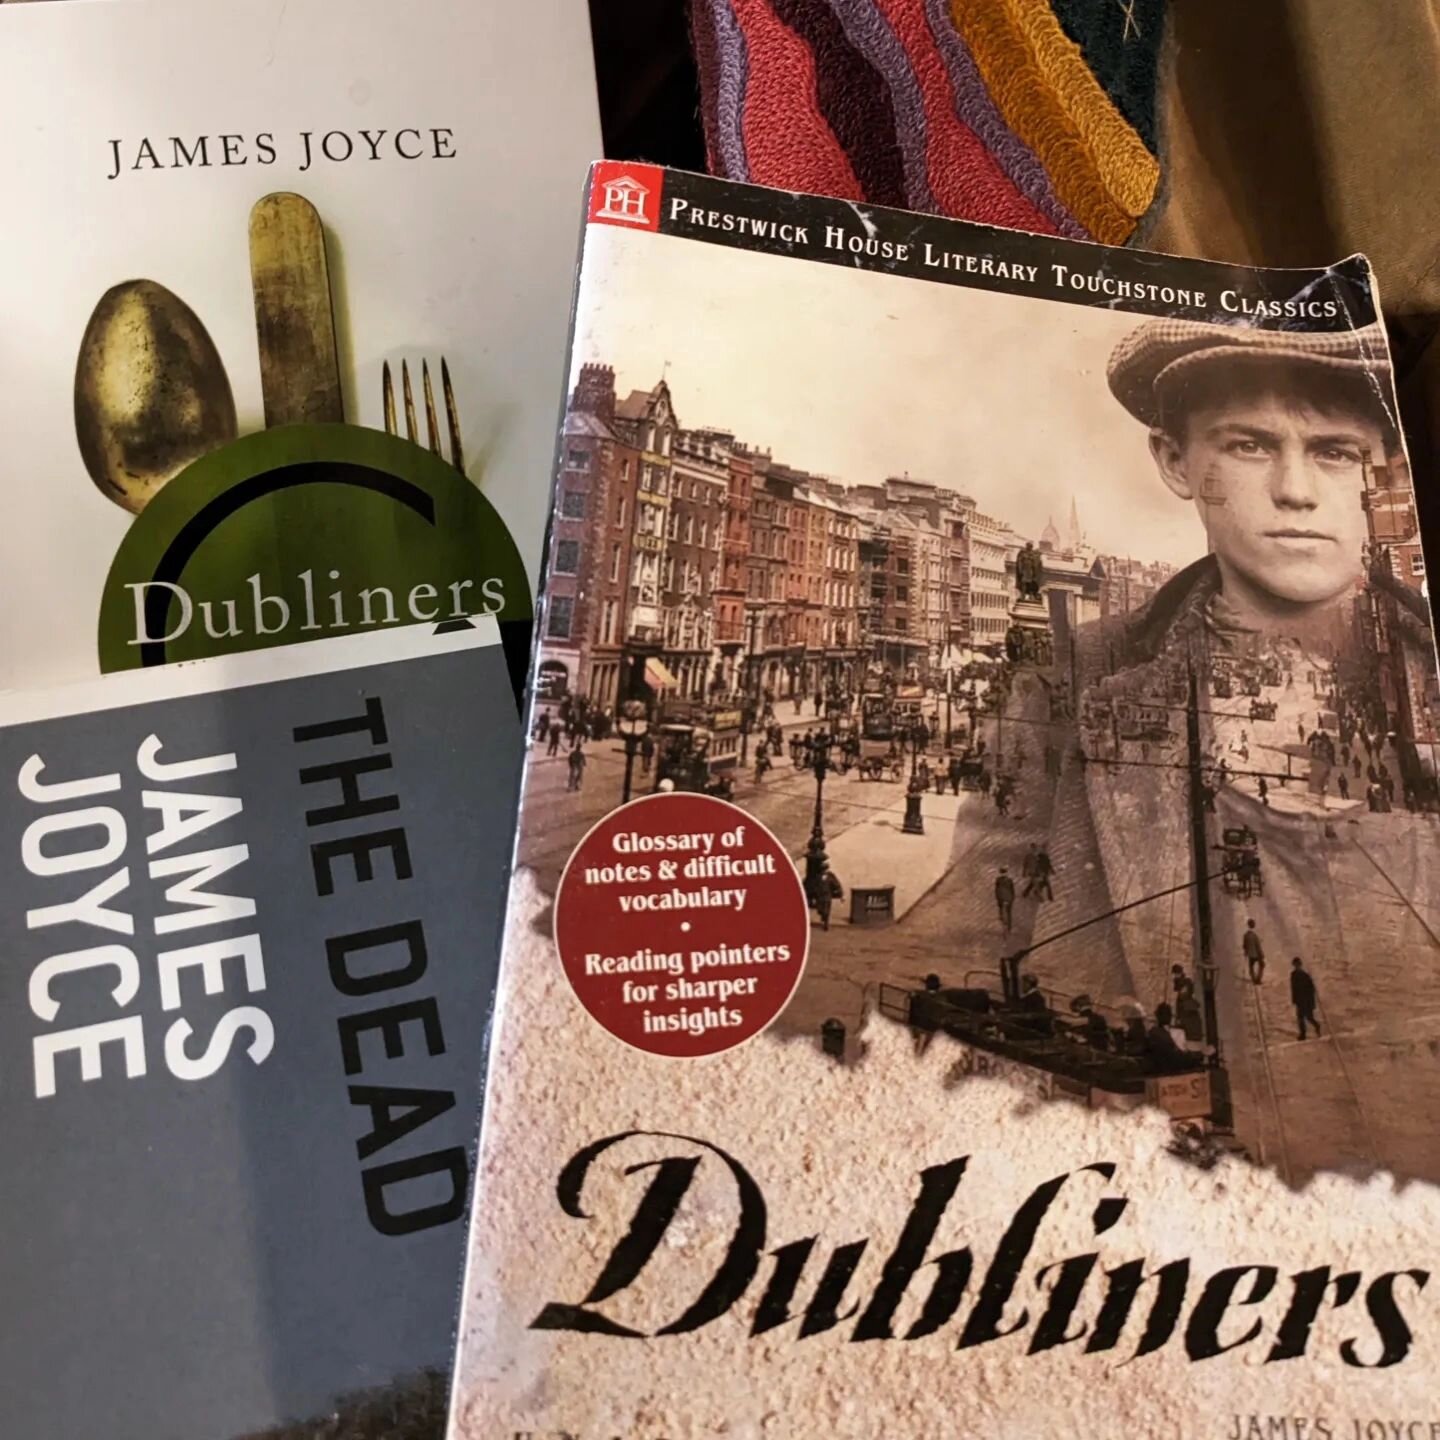 HAPPY THANKSGIVING AND WELCOME BACK SPORTS FANS @wordsjustwannahavefun December's book glamour shots are brought to you by DUBLINERS starring JAMES JOYCE.

quite possibly one of the greatest works of fiction bar none, DUBLINERS is packed full of exci